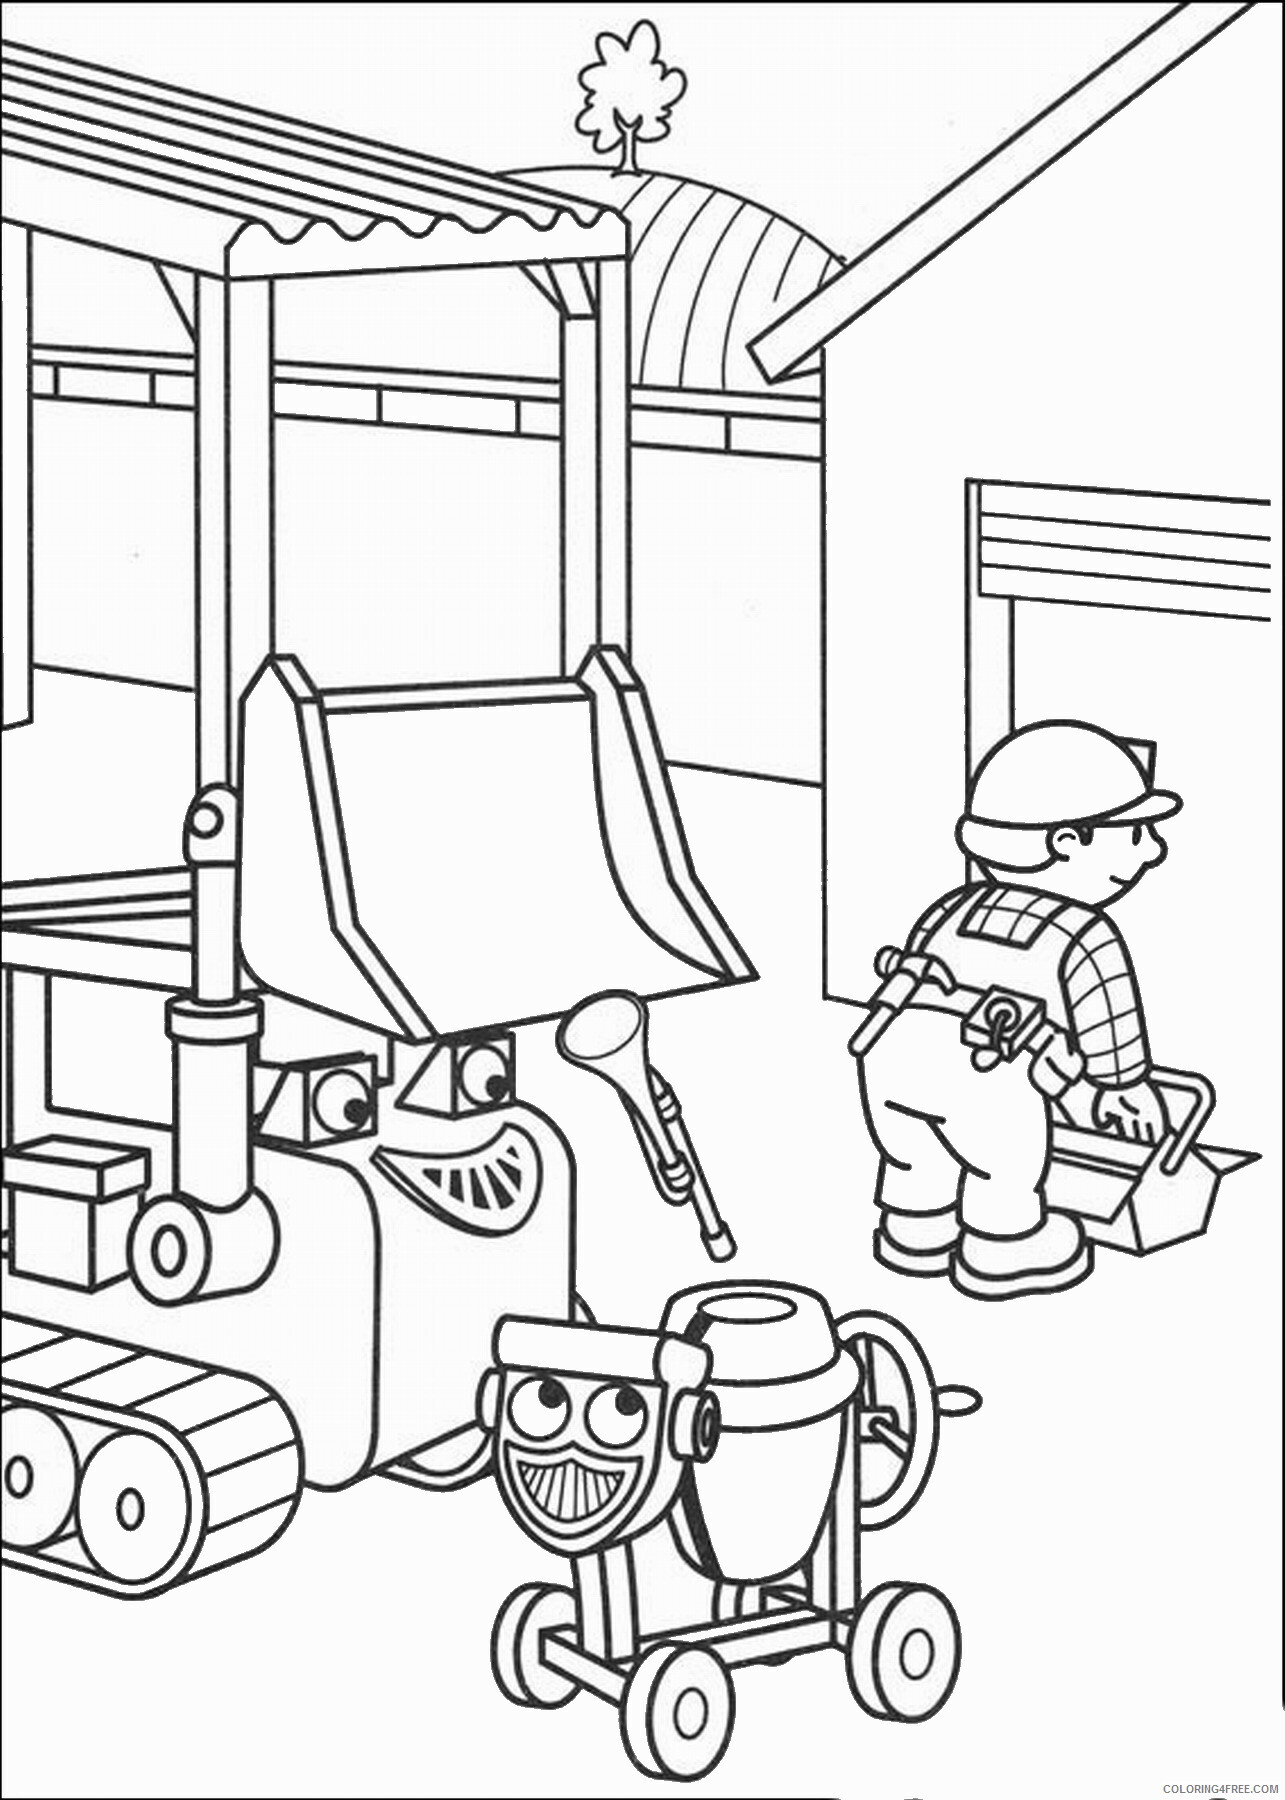 Bob the Builder Coloring Pages TV Film bob the builder_03 Printable 2020 00953 Coloring4free